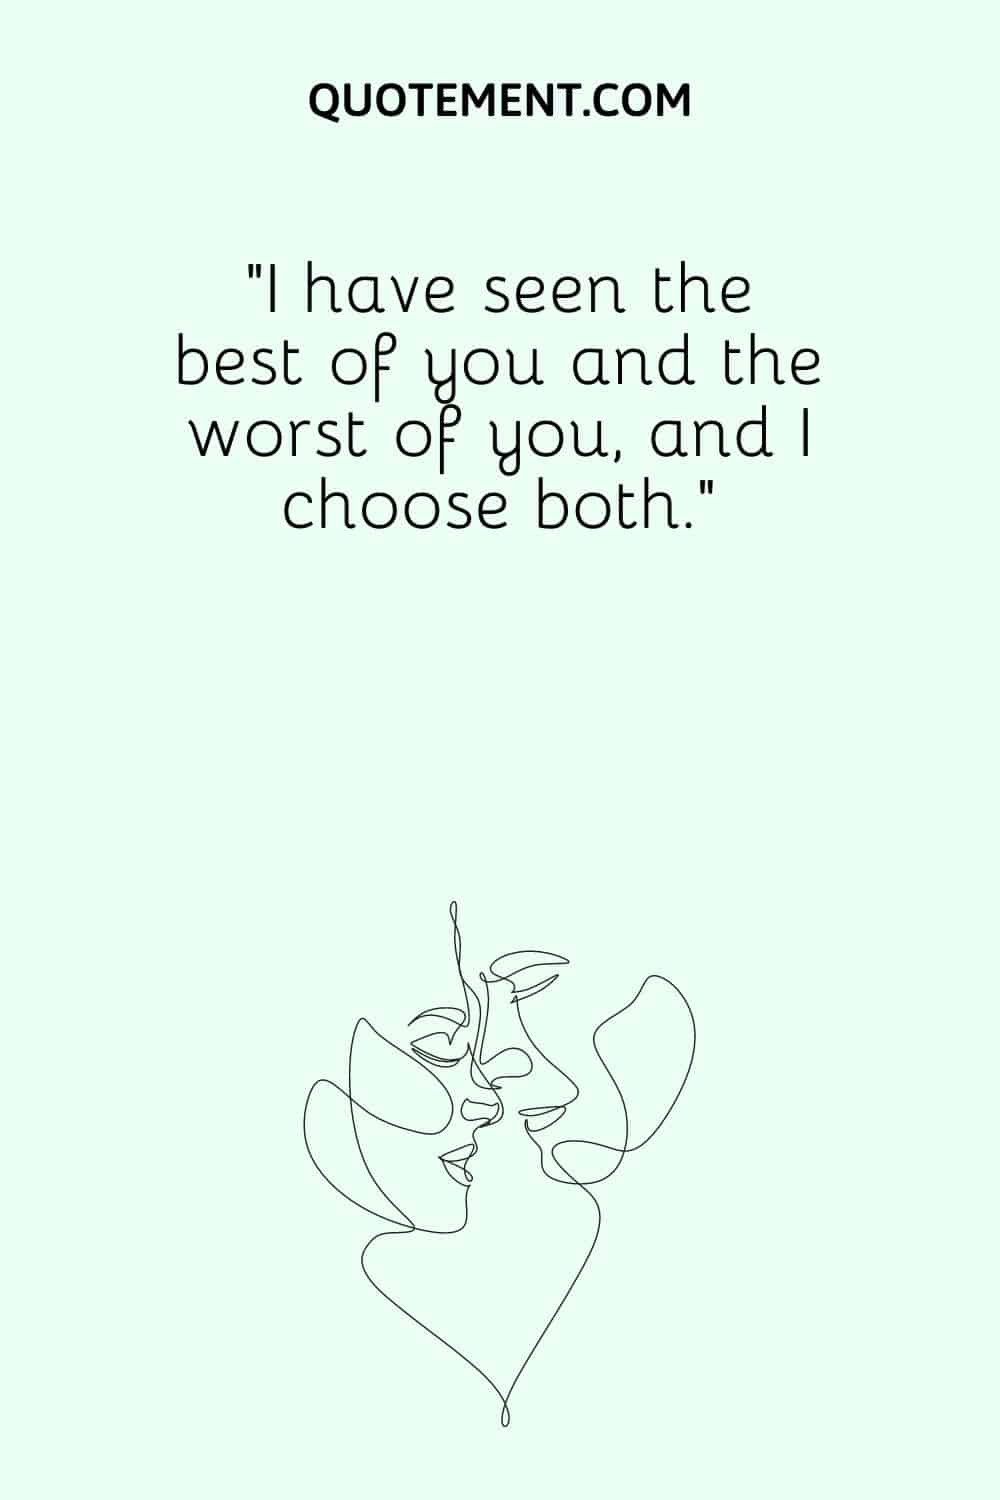 “I have seen the best of you and the worst of you, and I choose both.”